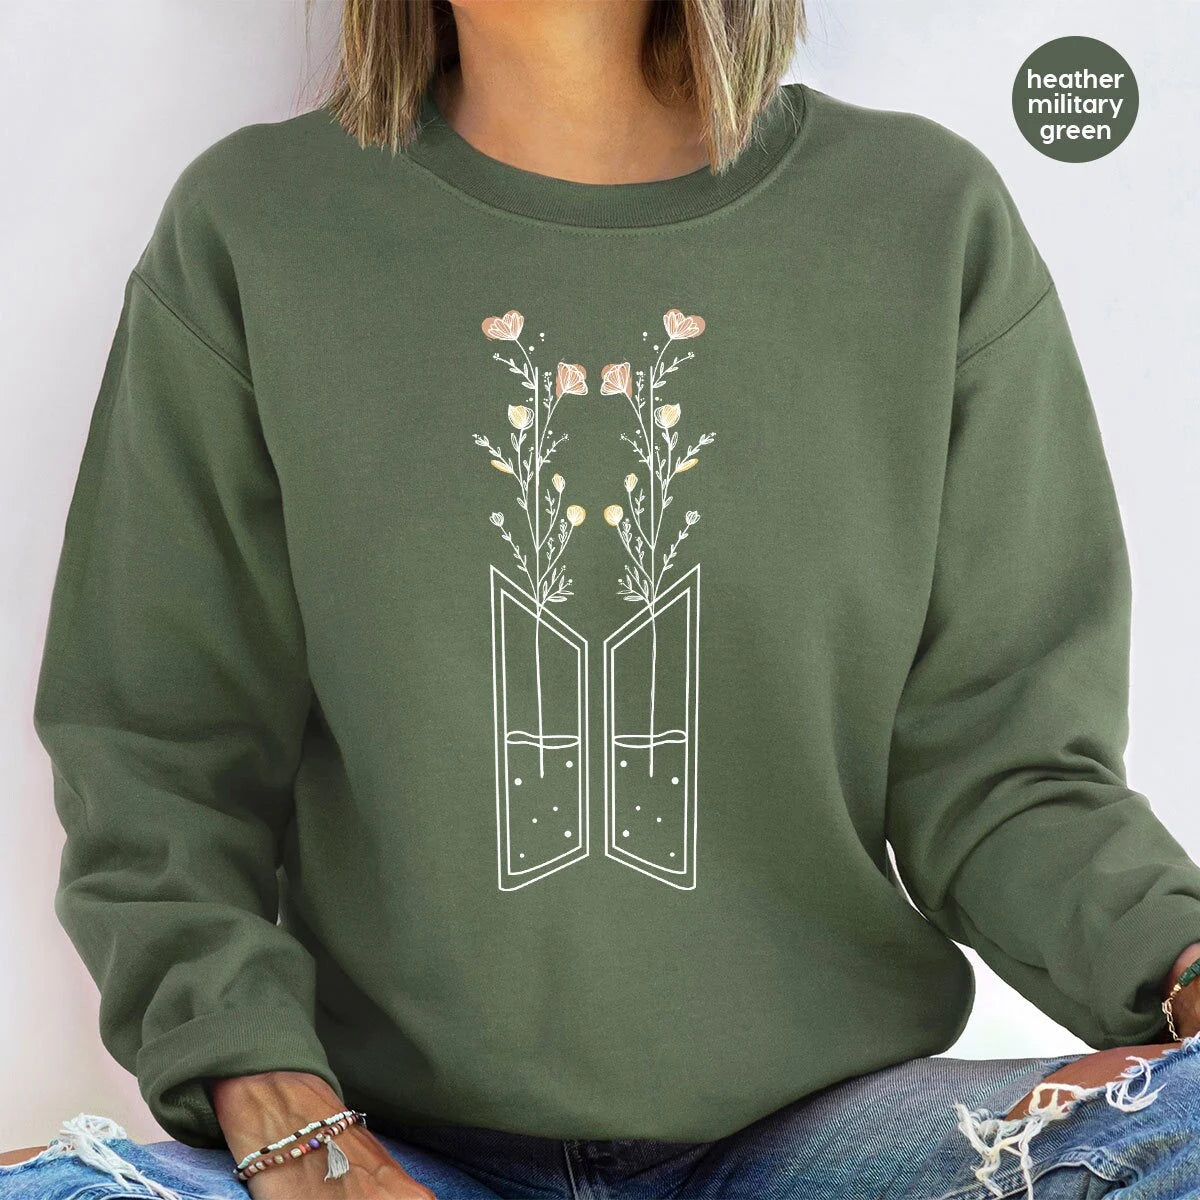 Aesthetic Crewneck Sweatshirt, Gifts for Her, Floral Long Sleeve Shirts, Hoodie for Women, Minimalist Flowers Graphic Tees, Girlfriend Gift